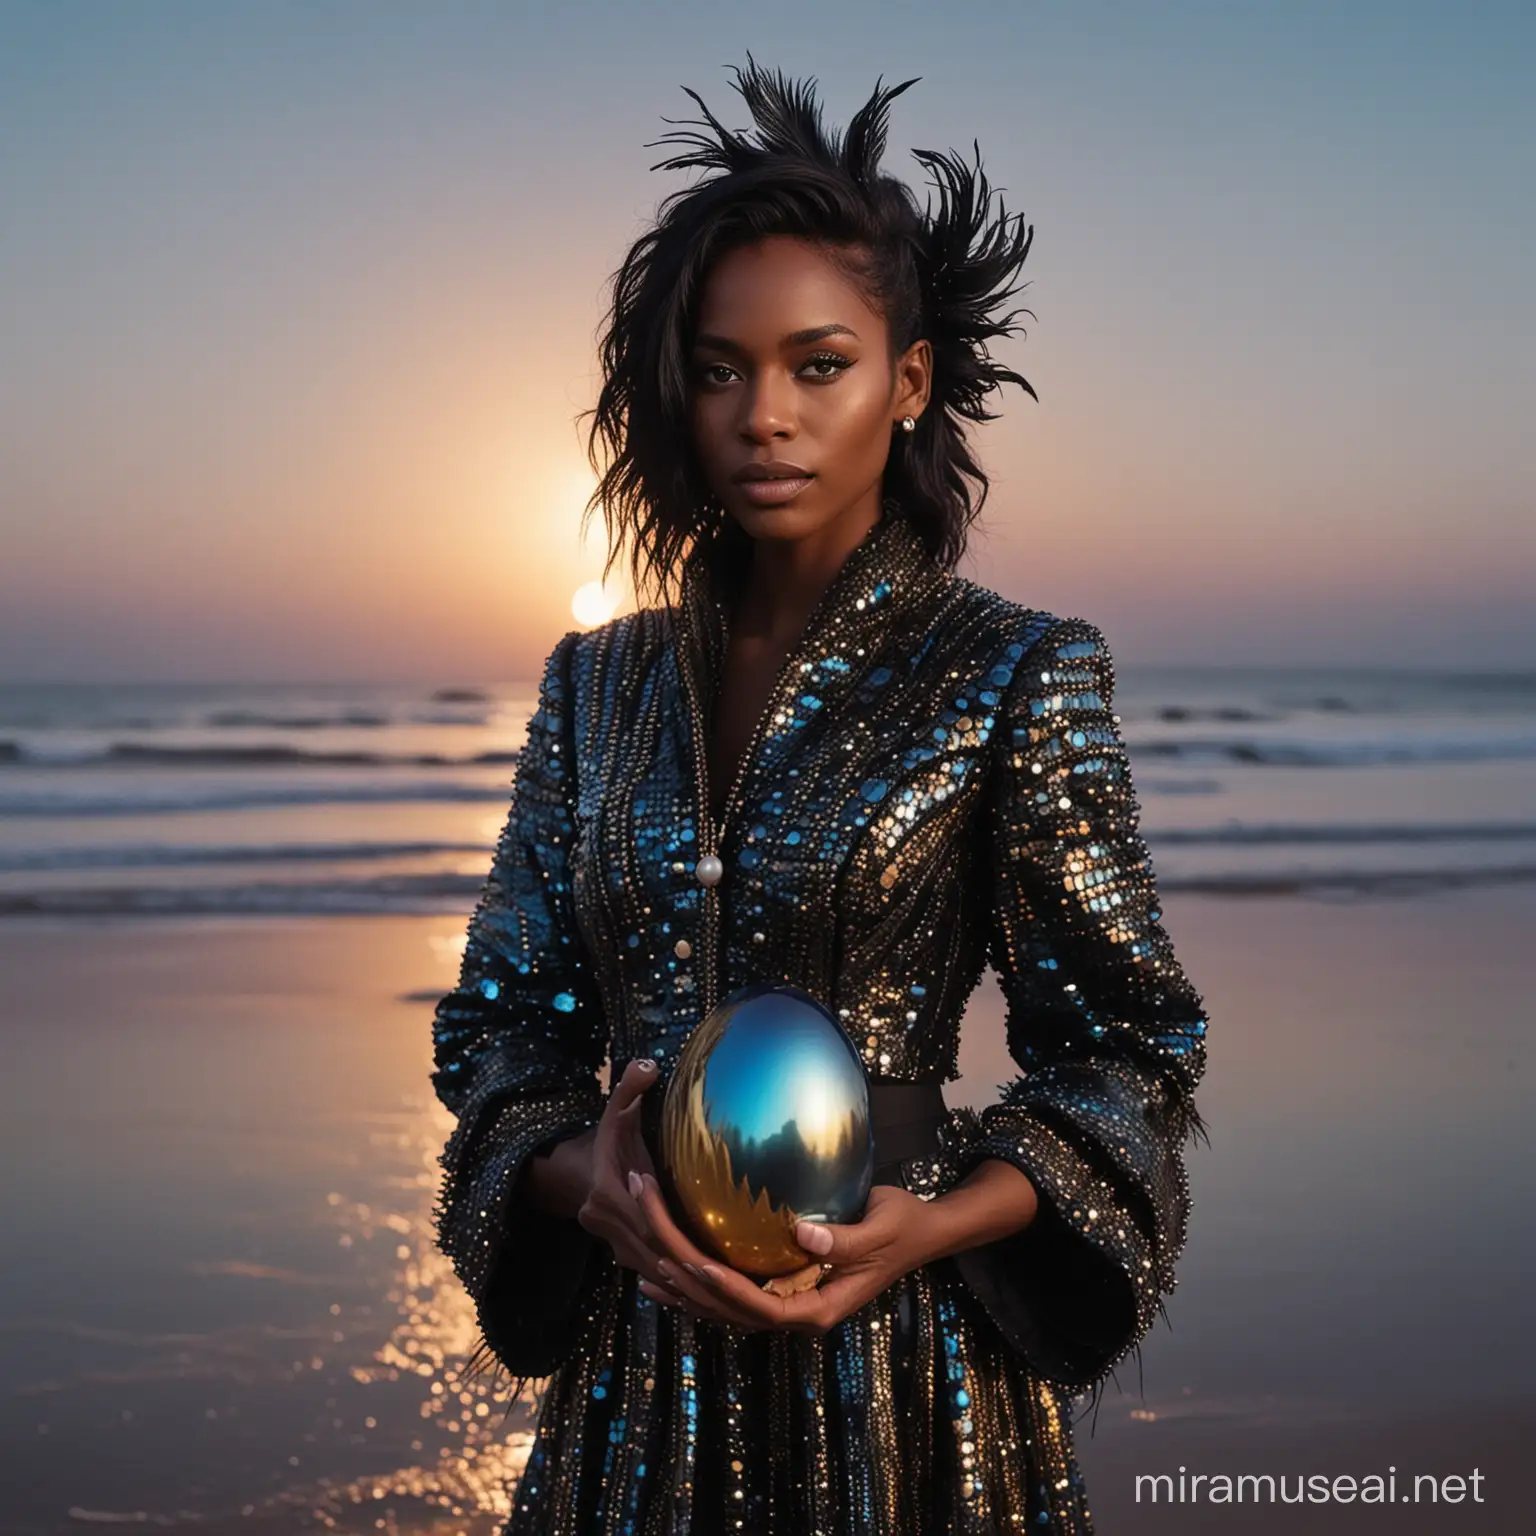 A chocolate skinned woman model holding a metallic black blue colored tiny dragon inside a golden eggshell, pearl iridescent, wearing metallic black shiny Schiapirelli inspired couture feather jacket, silver shiny crone, extreme long black hair, wes anderson color palette, night with huge moon beach background, 35mm photography